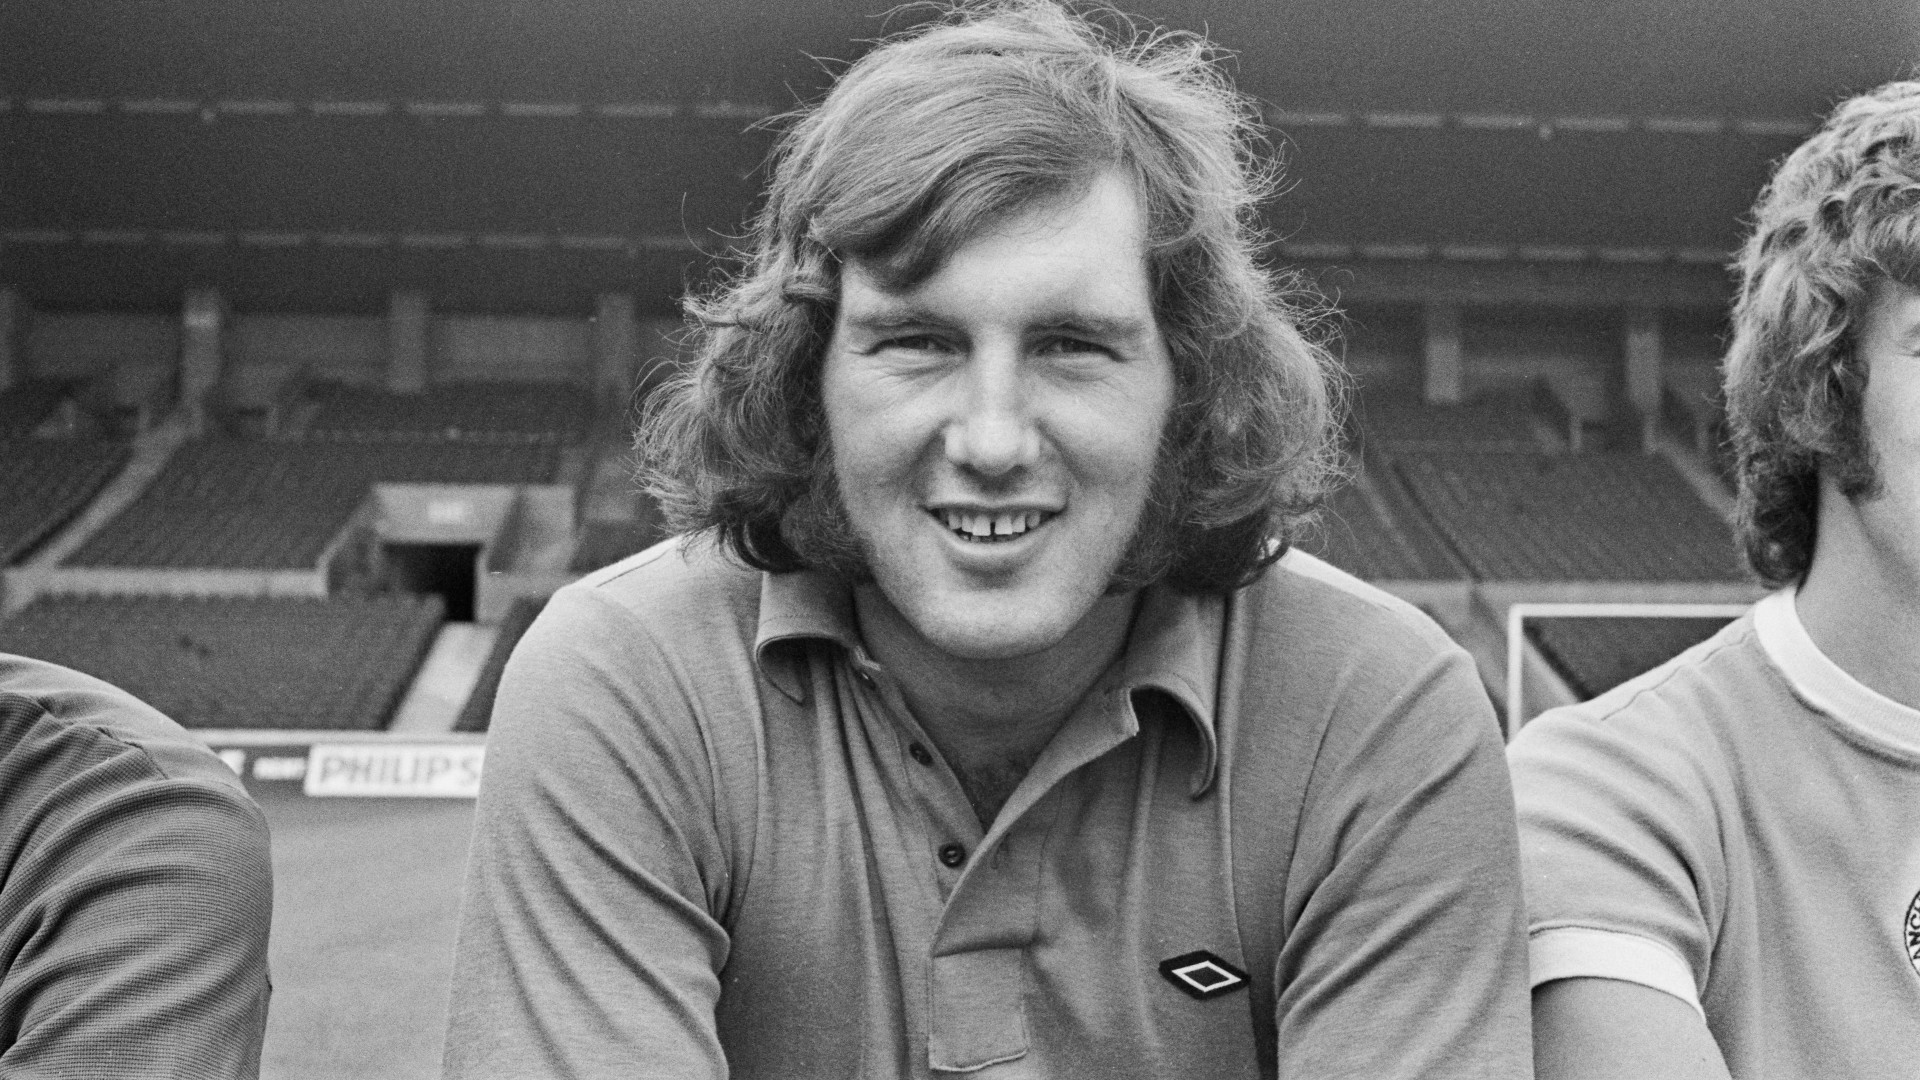 SMILING GREAT : Joe Corrigan is snapped at the start of the 1973/74 football season.